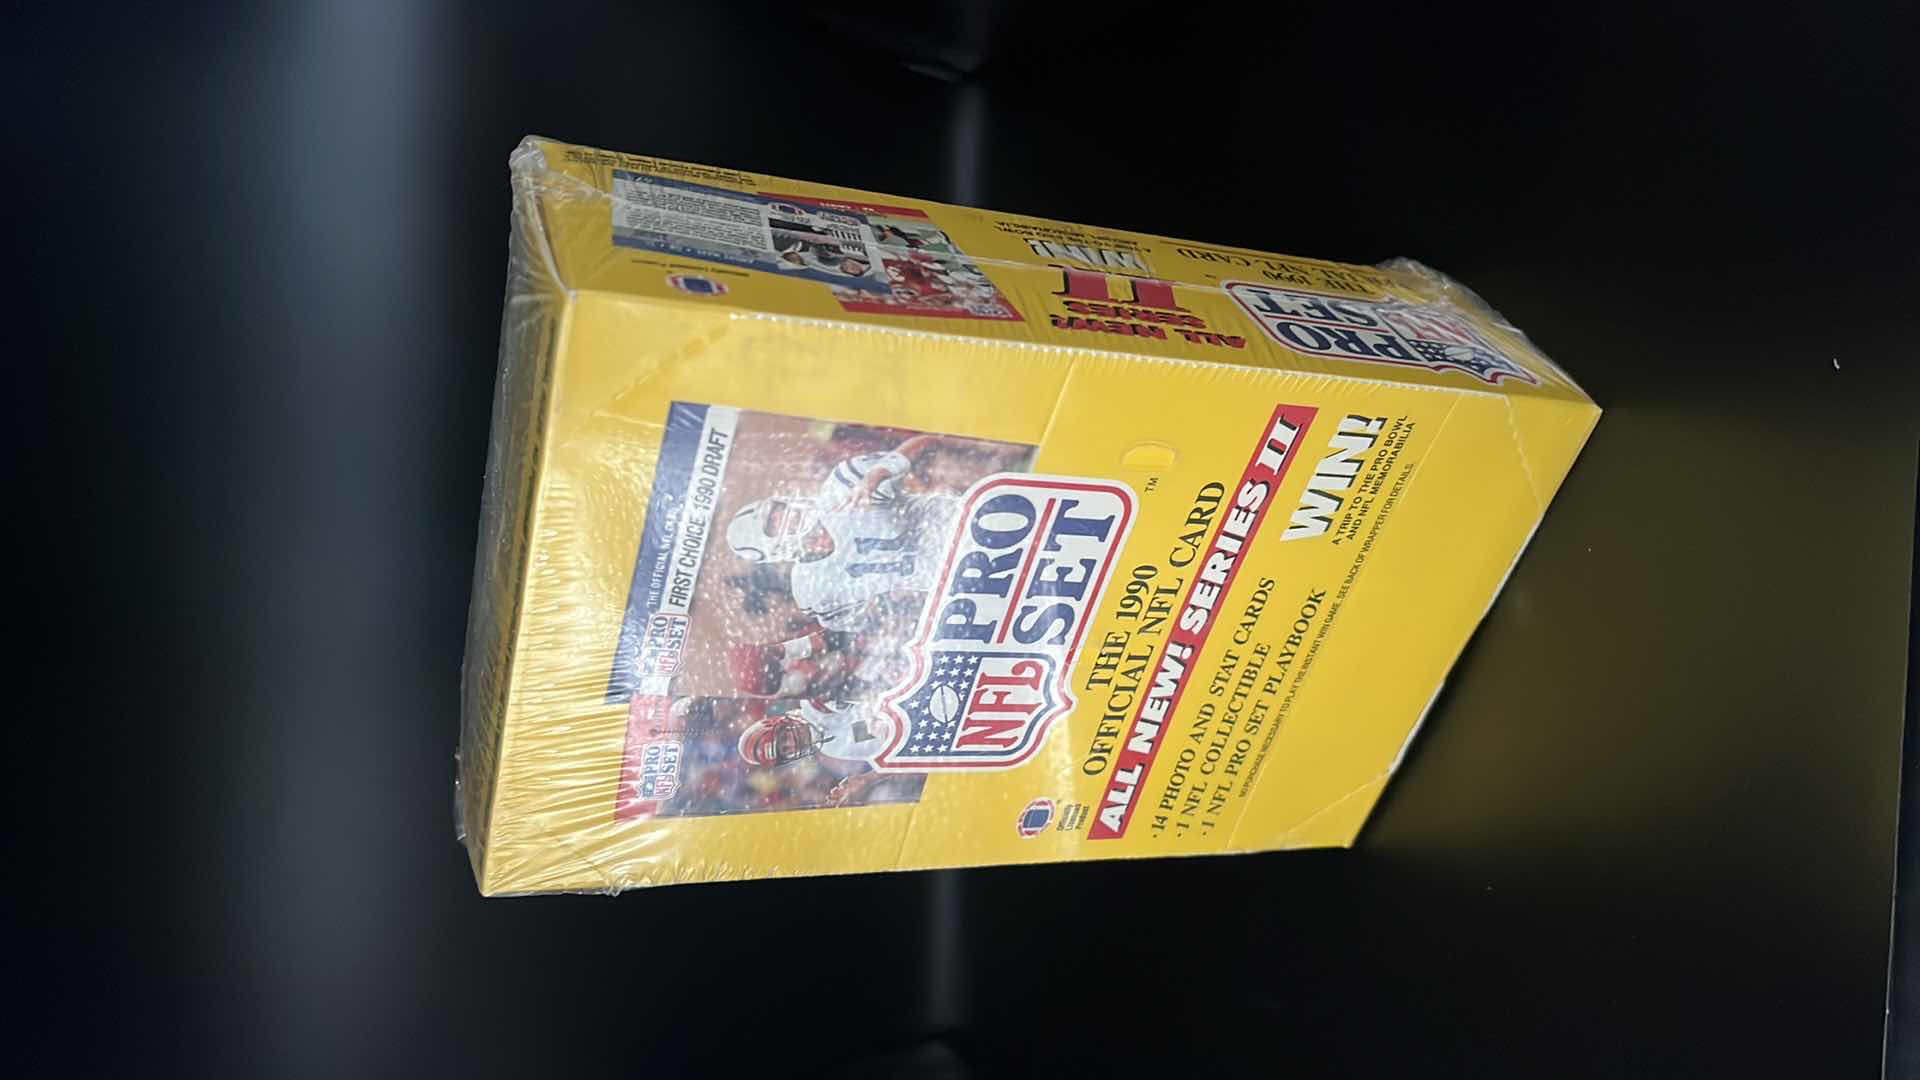 Photo 3 of NFL PRO SET 1990 OFFICIAL NFL CARD COLLECTOR PLAYBOOK